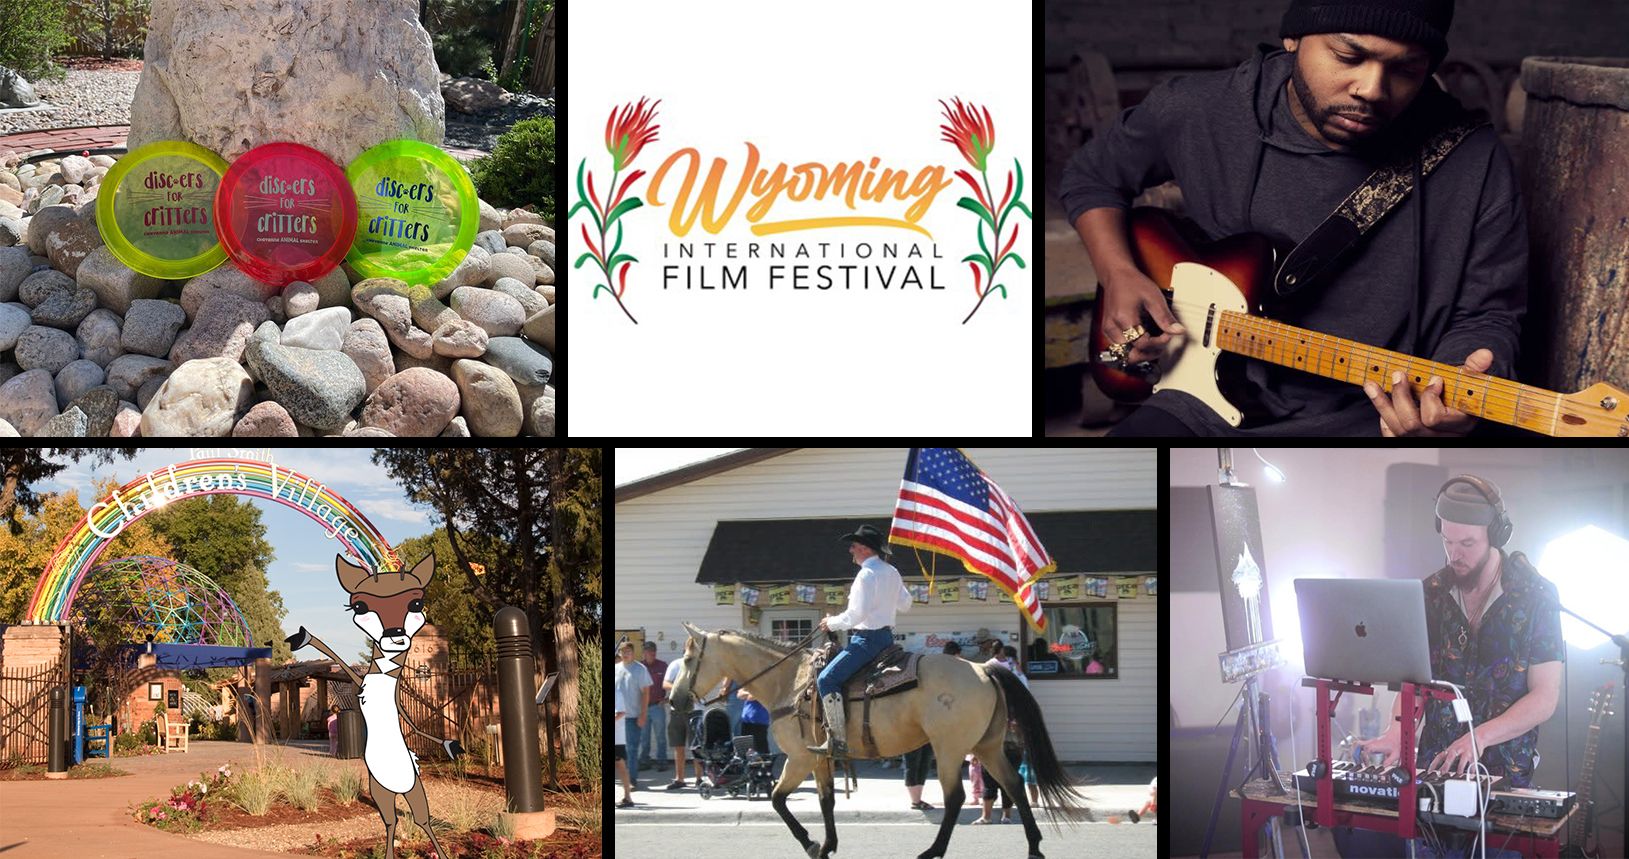 Take A Look At What Is Happening In Cheyenne This Weekend!